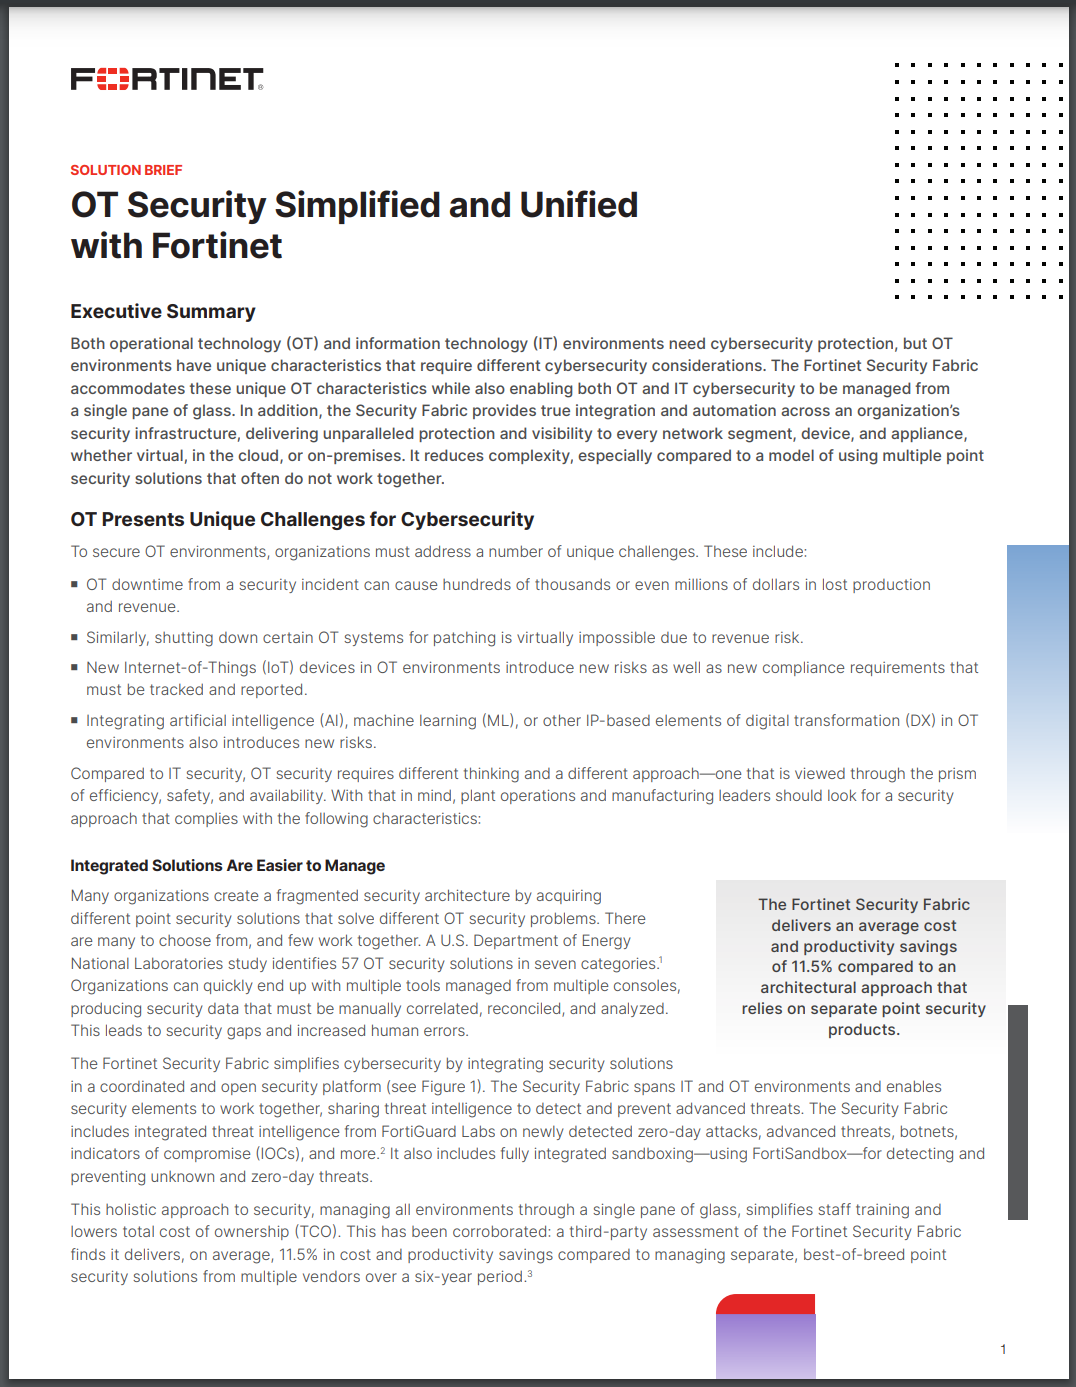 SB-OT Security Simplified and Unified with Fortinet (sold in package, 10pc per package)